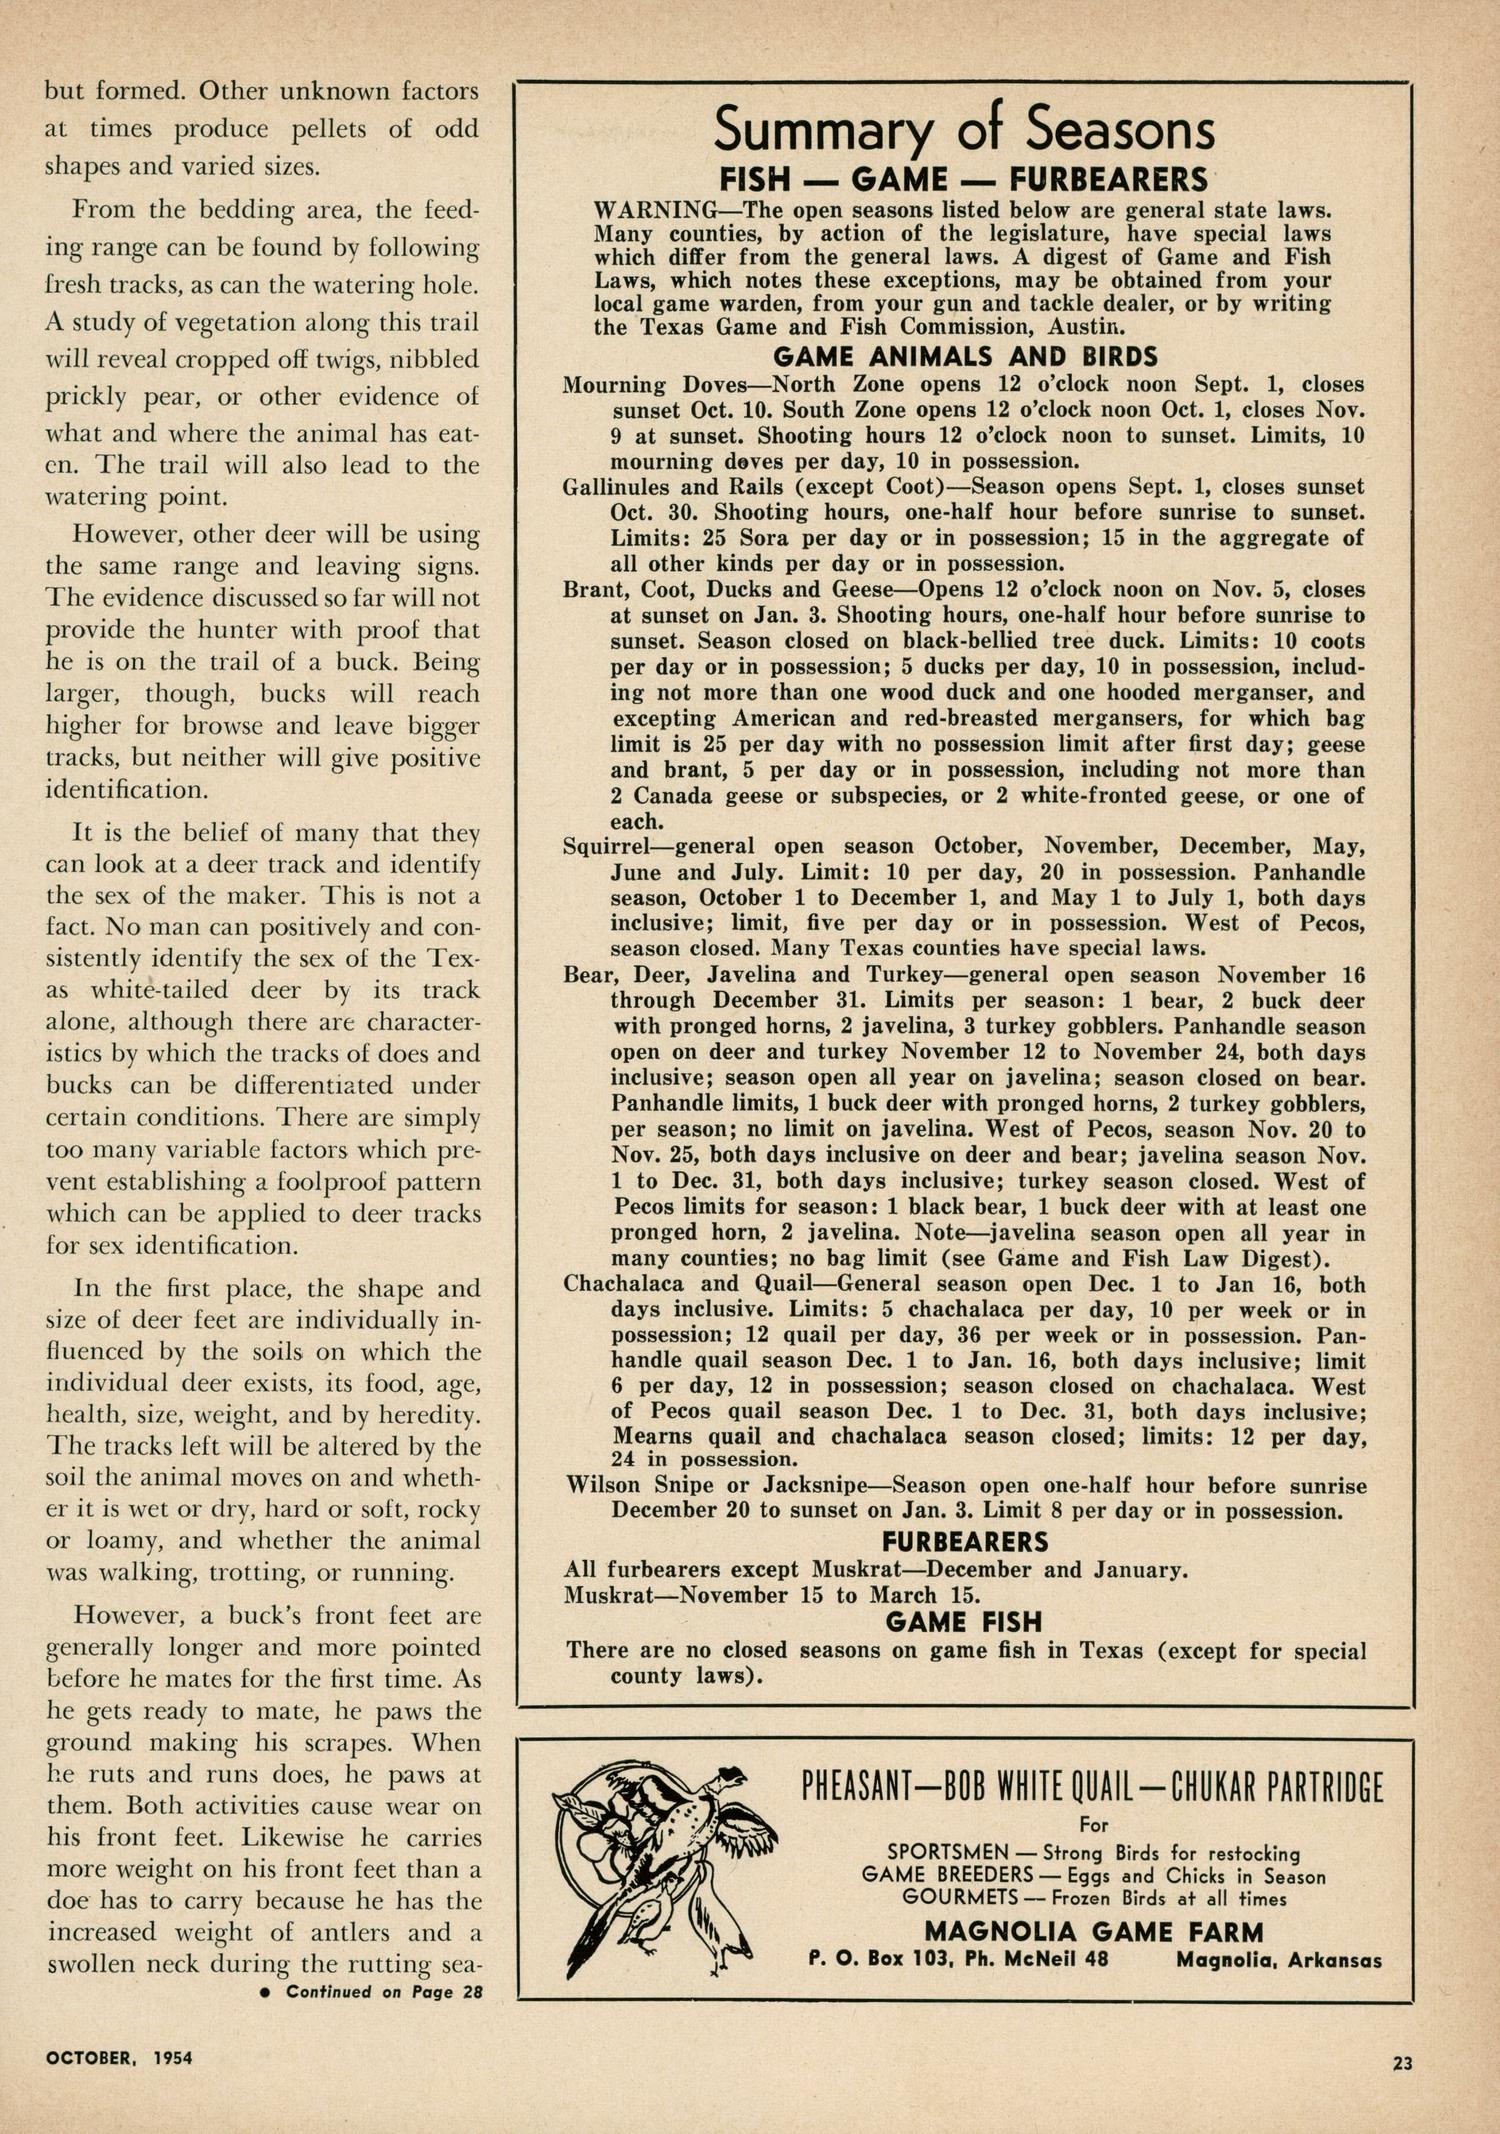 Texas Game and Fish, Volume 12, Number 11, October 1954
                                                
                                                    23
                                                